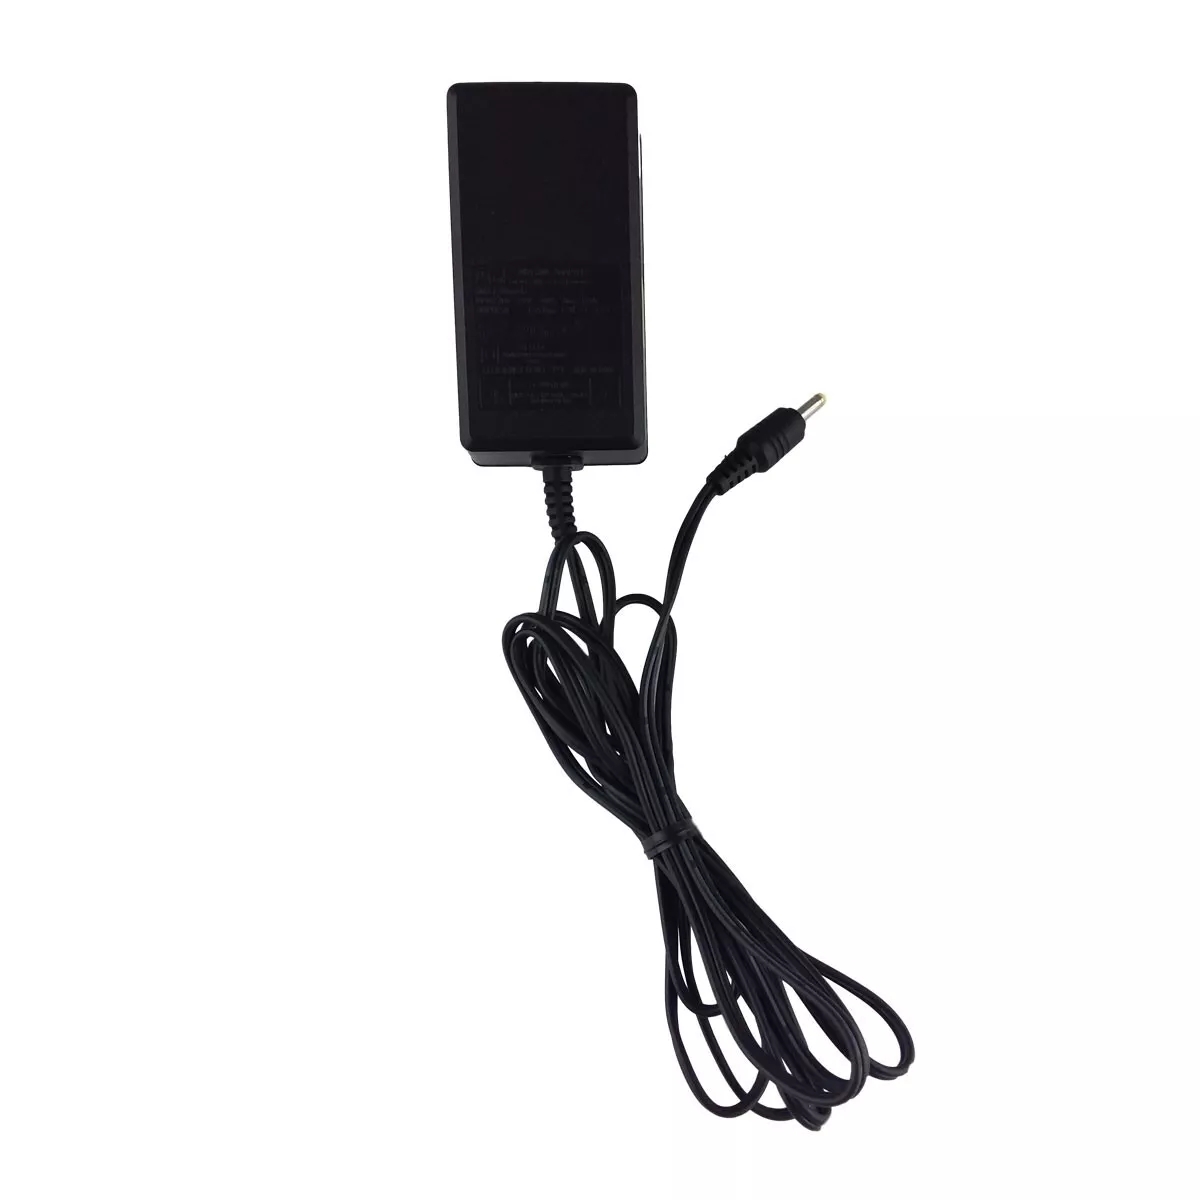 *Brand NEW*Original AcBel WAA016 5 V 1.5A AC Adapter for Products 100-120V 60Hz Power Supply